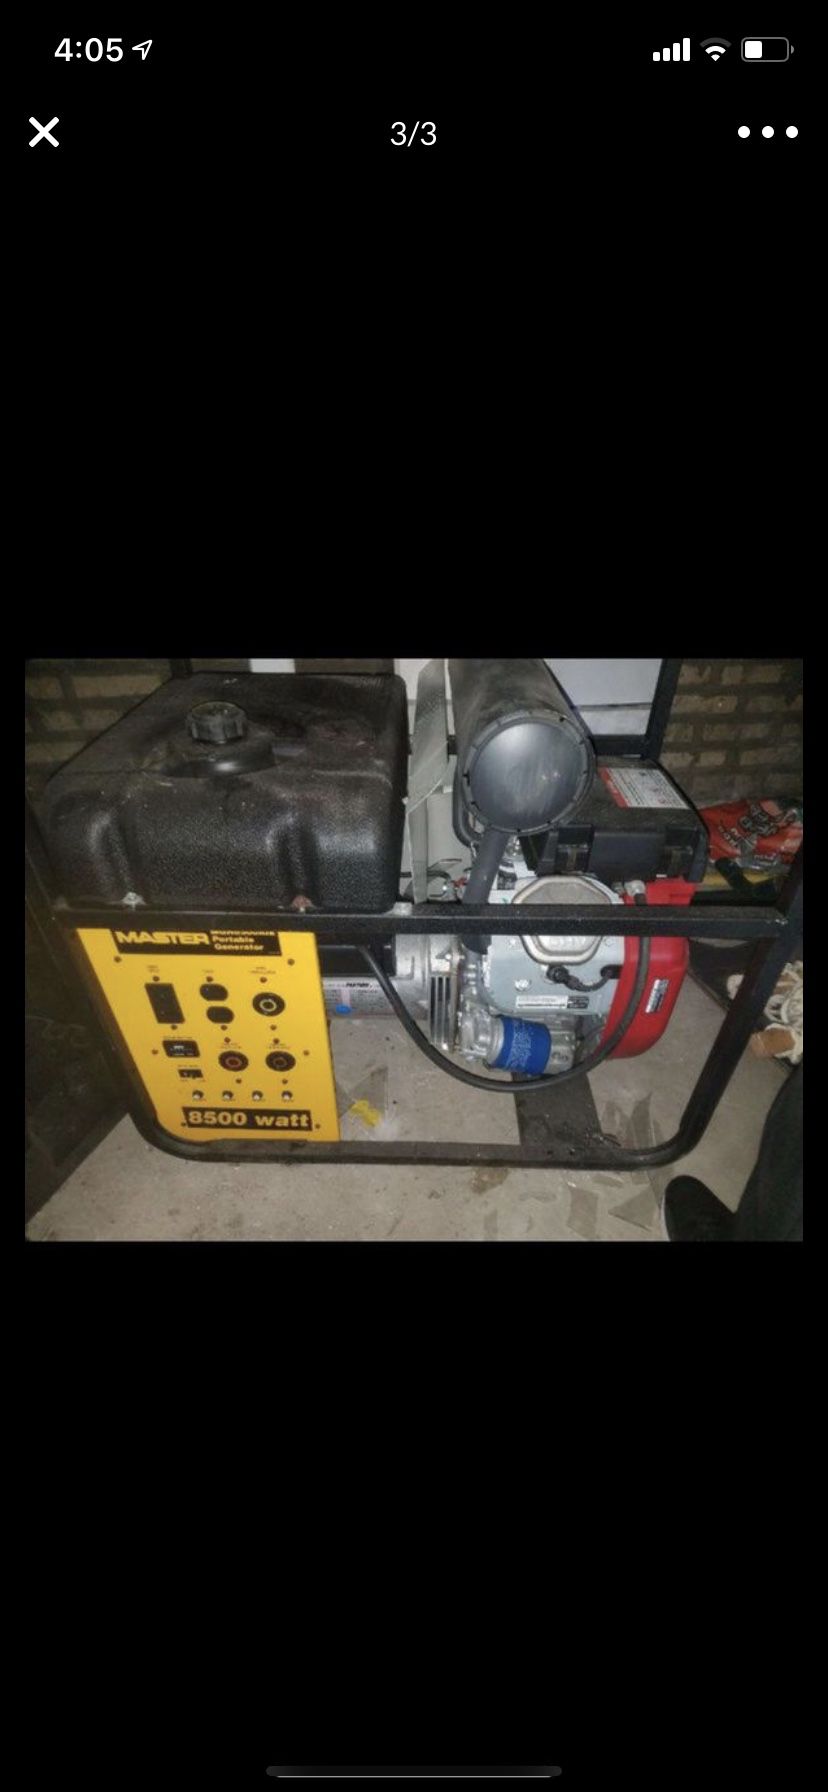 Honda generator (still Available Don’t Know Why It Says Sold)